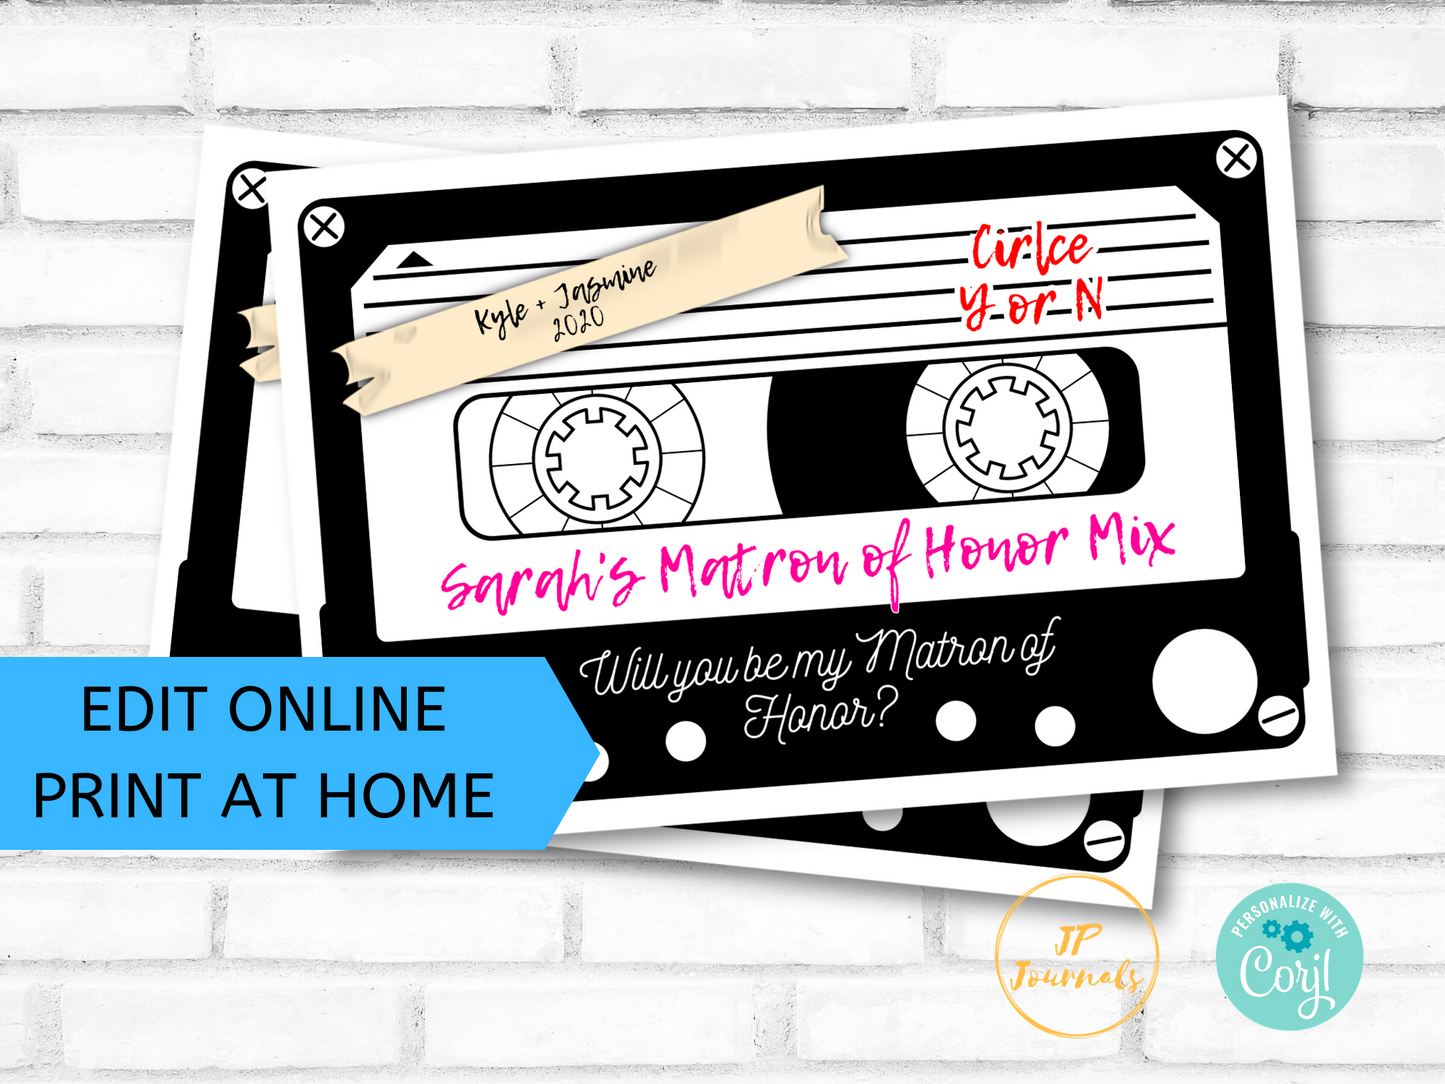 90s Themed Printable Bridesmaid Proposal Card - Vintage Cassette Tape